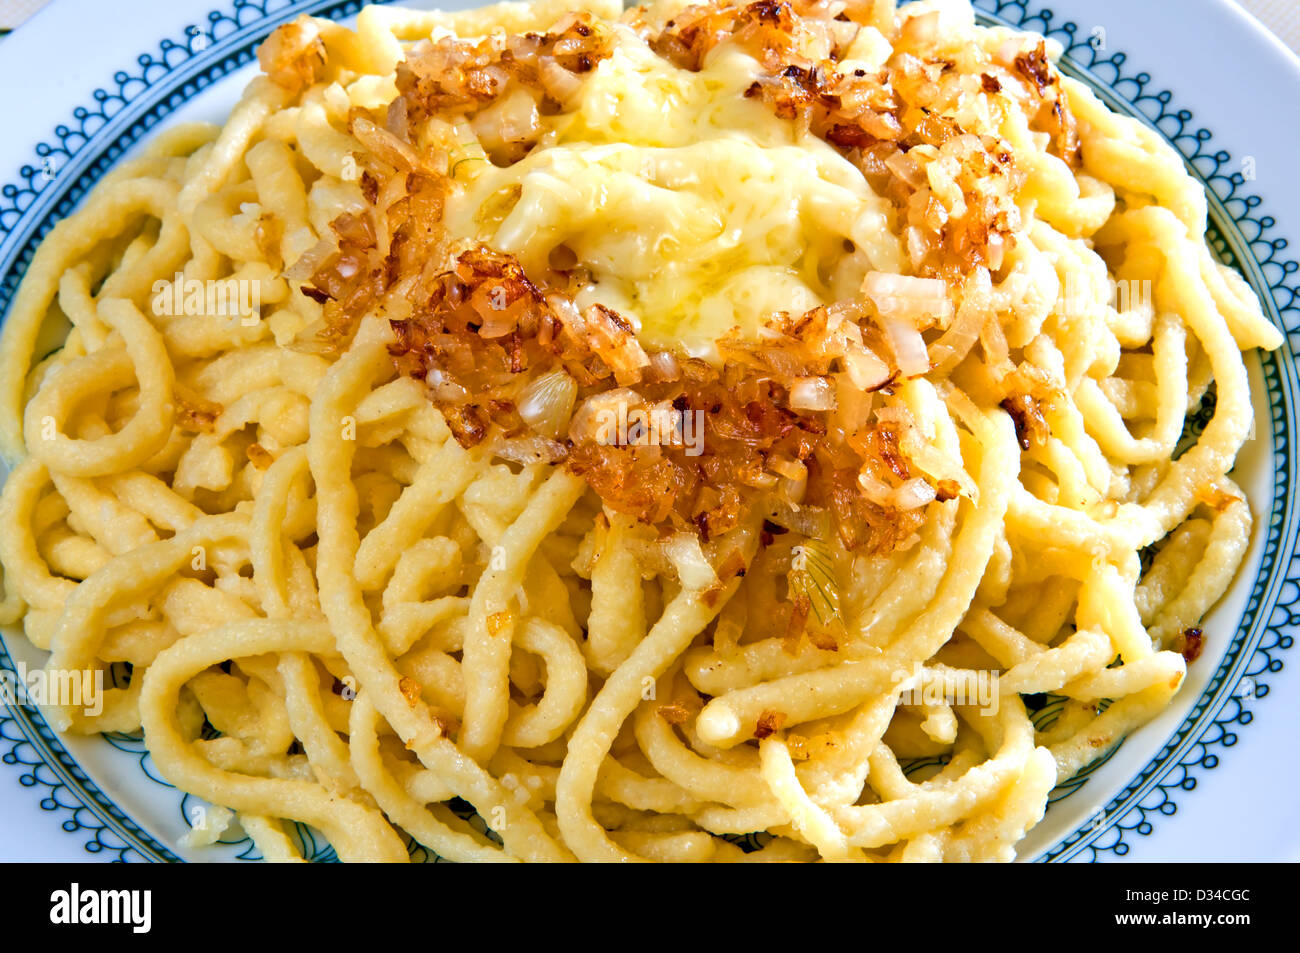 German cheese noodles called spaetzle Stock Photo